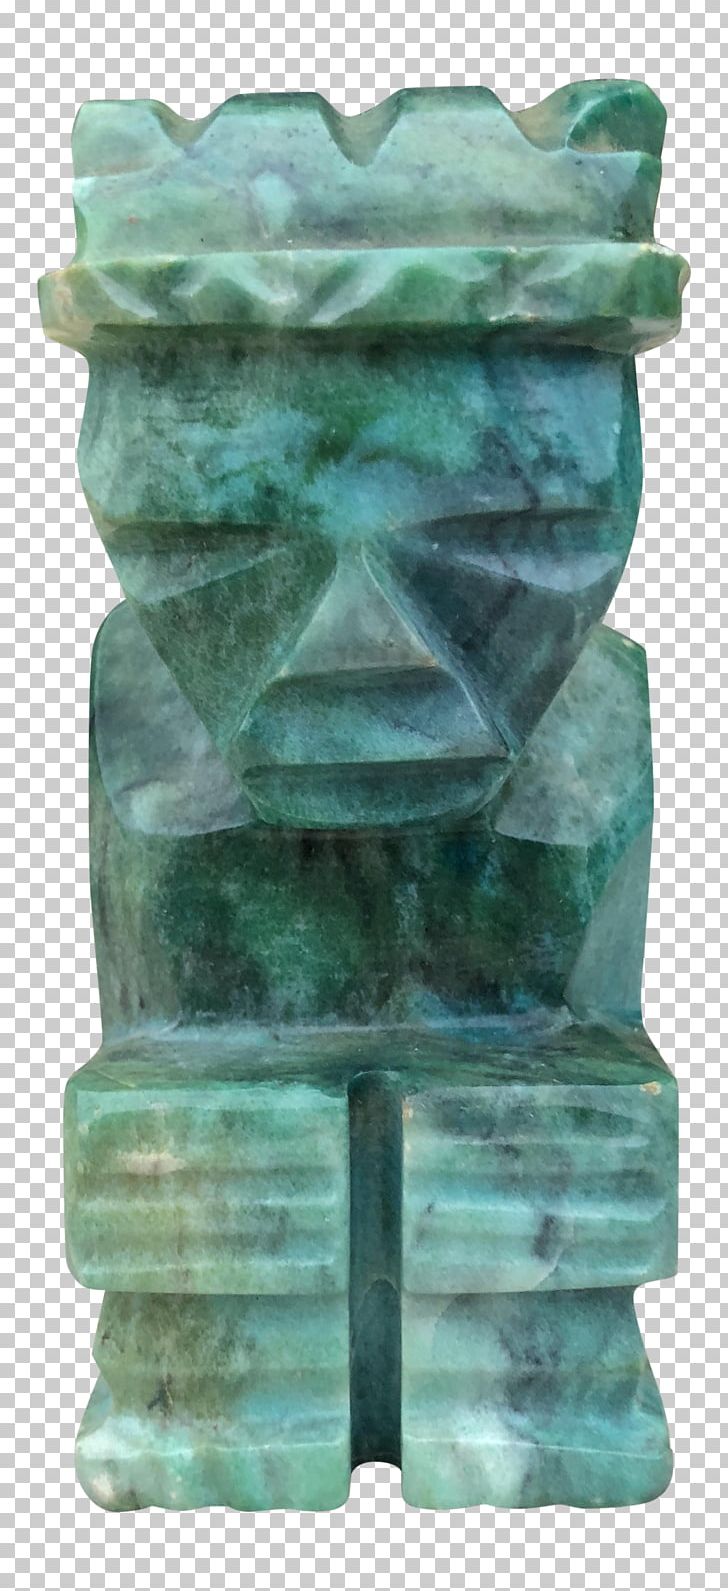 Stone Sculpture Stone Carving Wood Carving PNG, Clipart, Artifact, Carving, Chairish, Green, Jade Free PNG Download